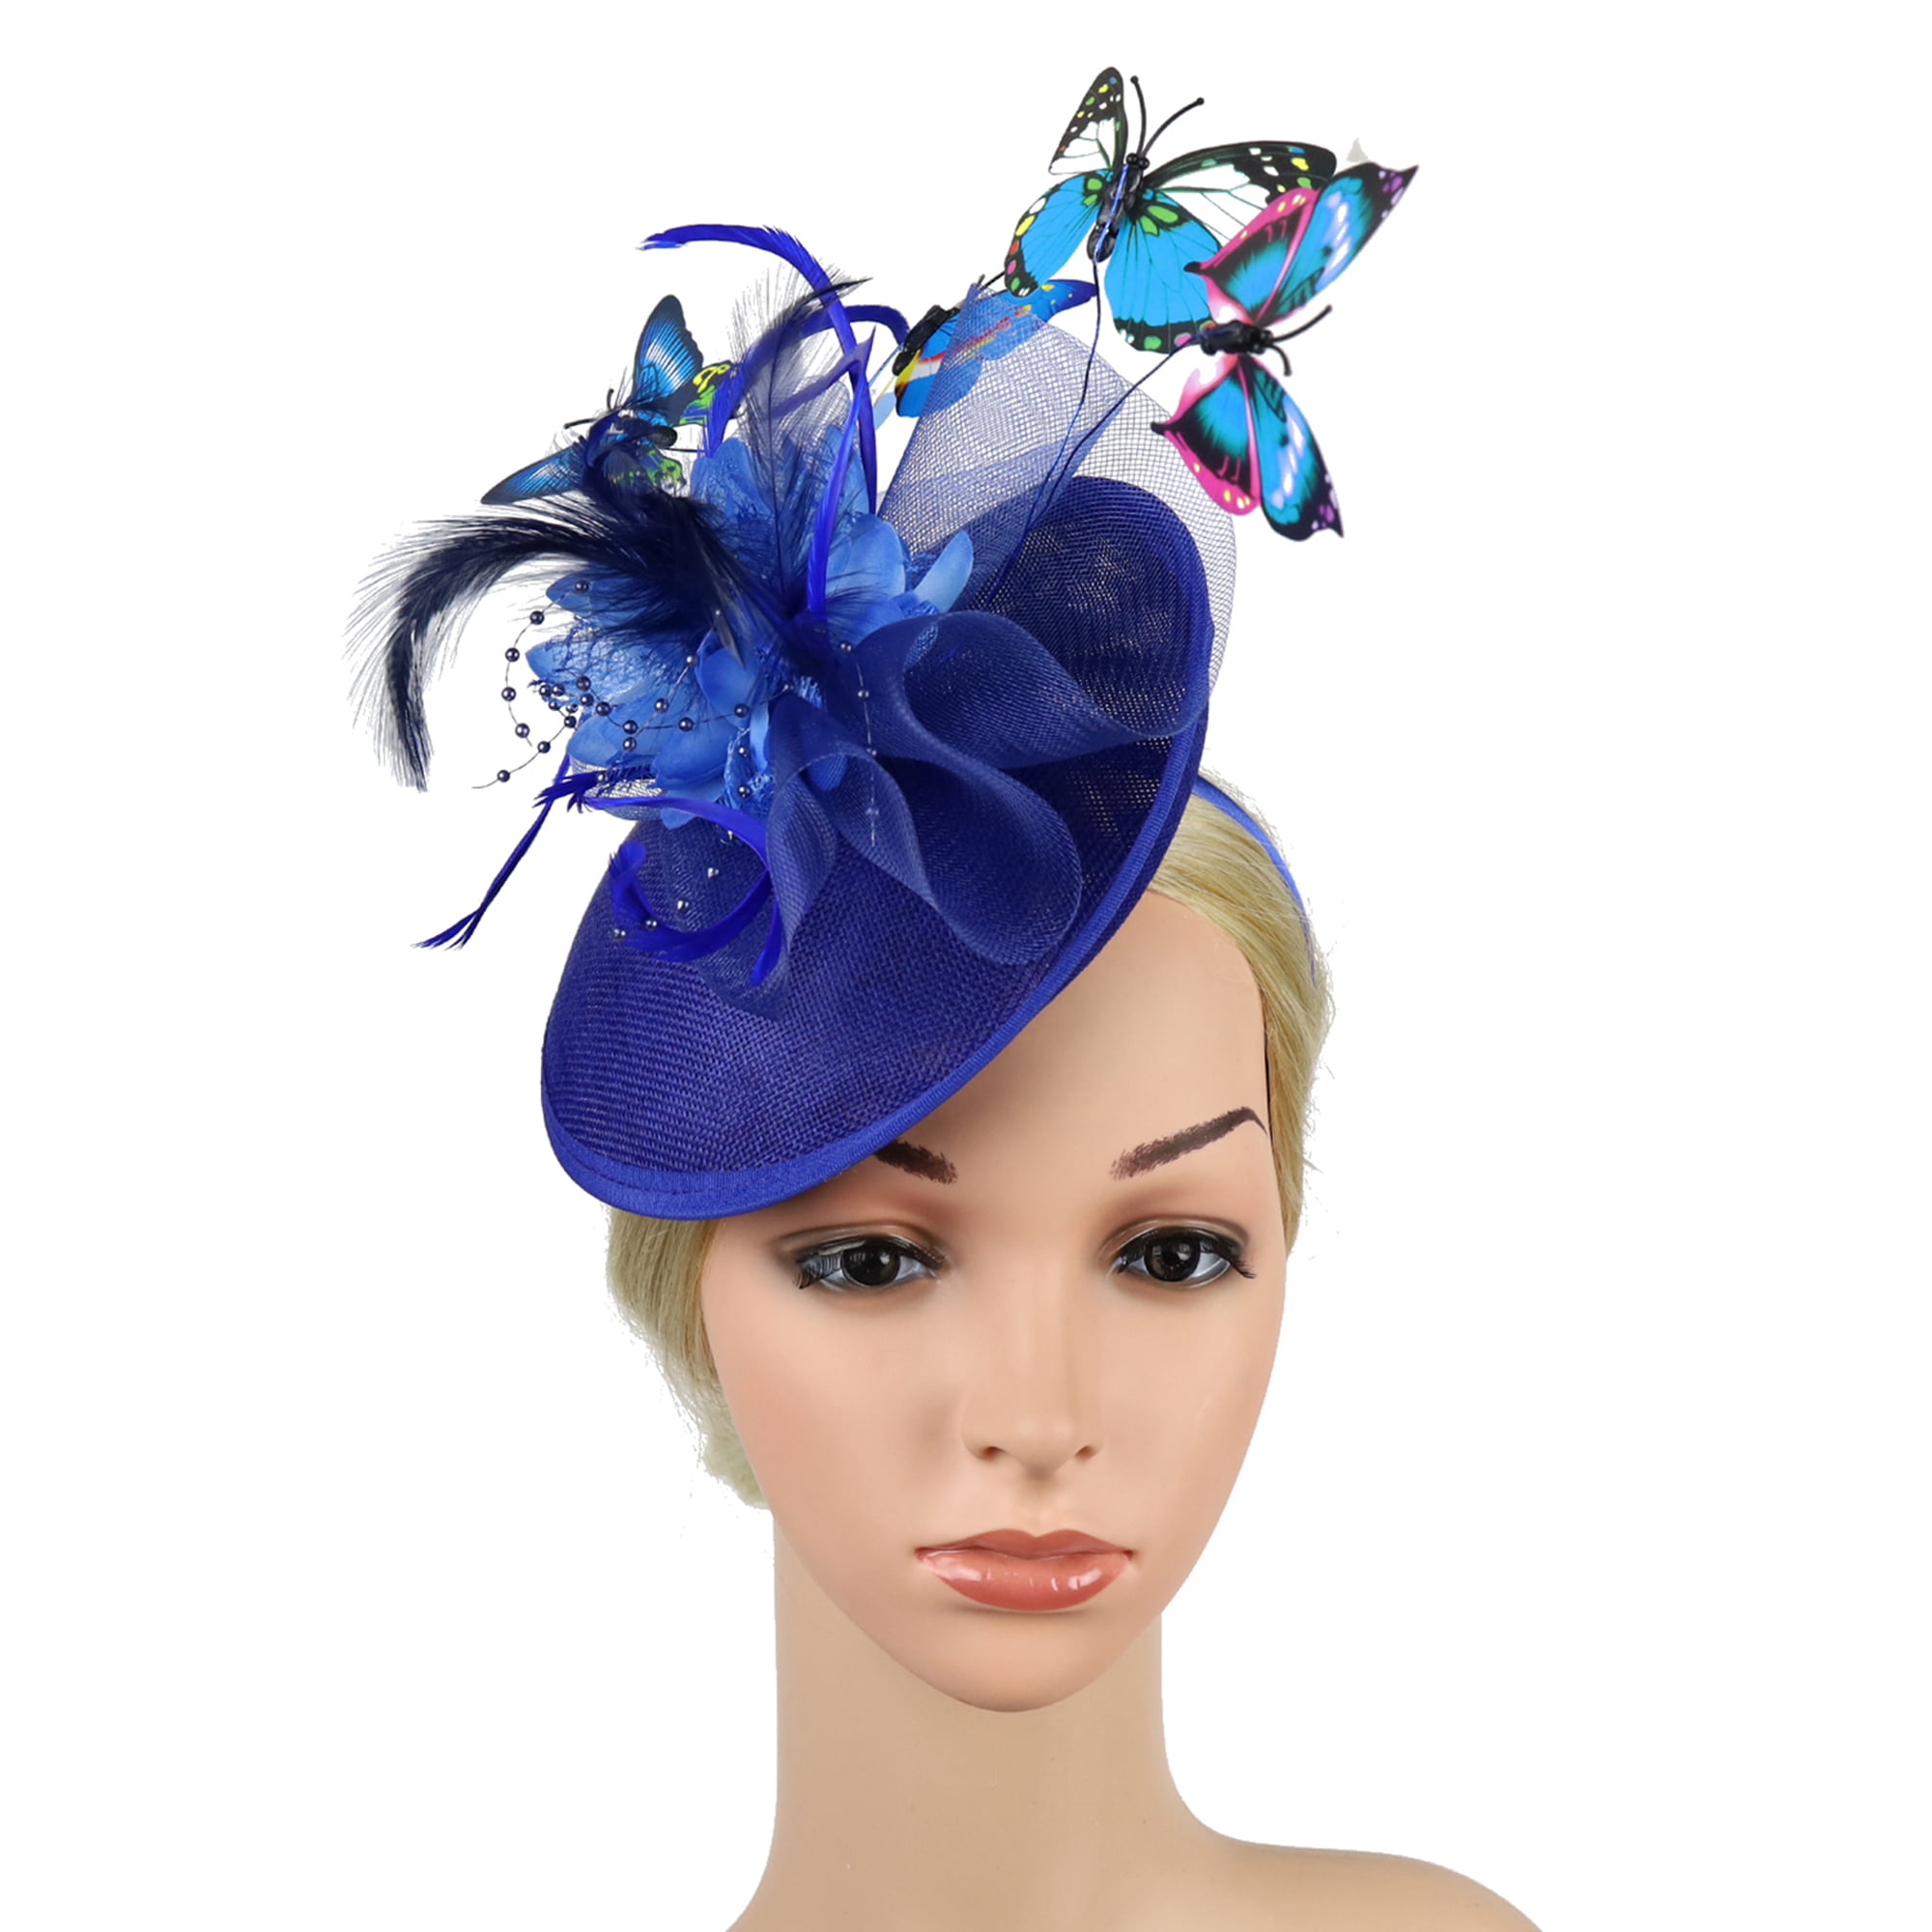 Fascinator Hats for Women Cocktail Feather Mesh Net Veil Party Kentucky Derby 